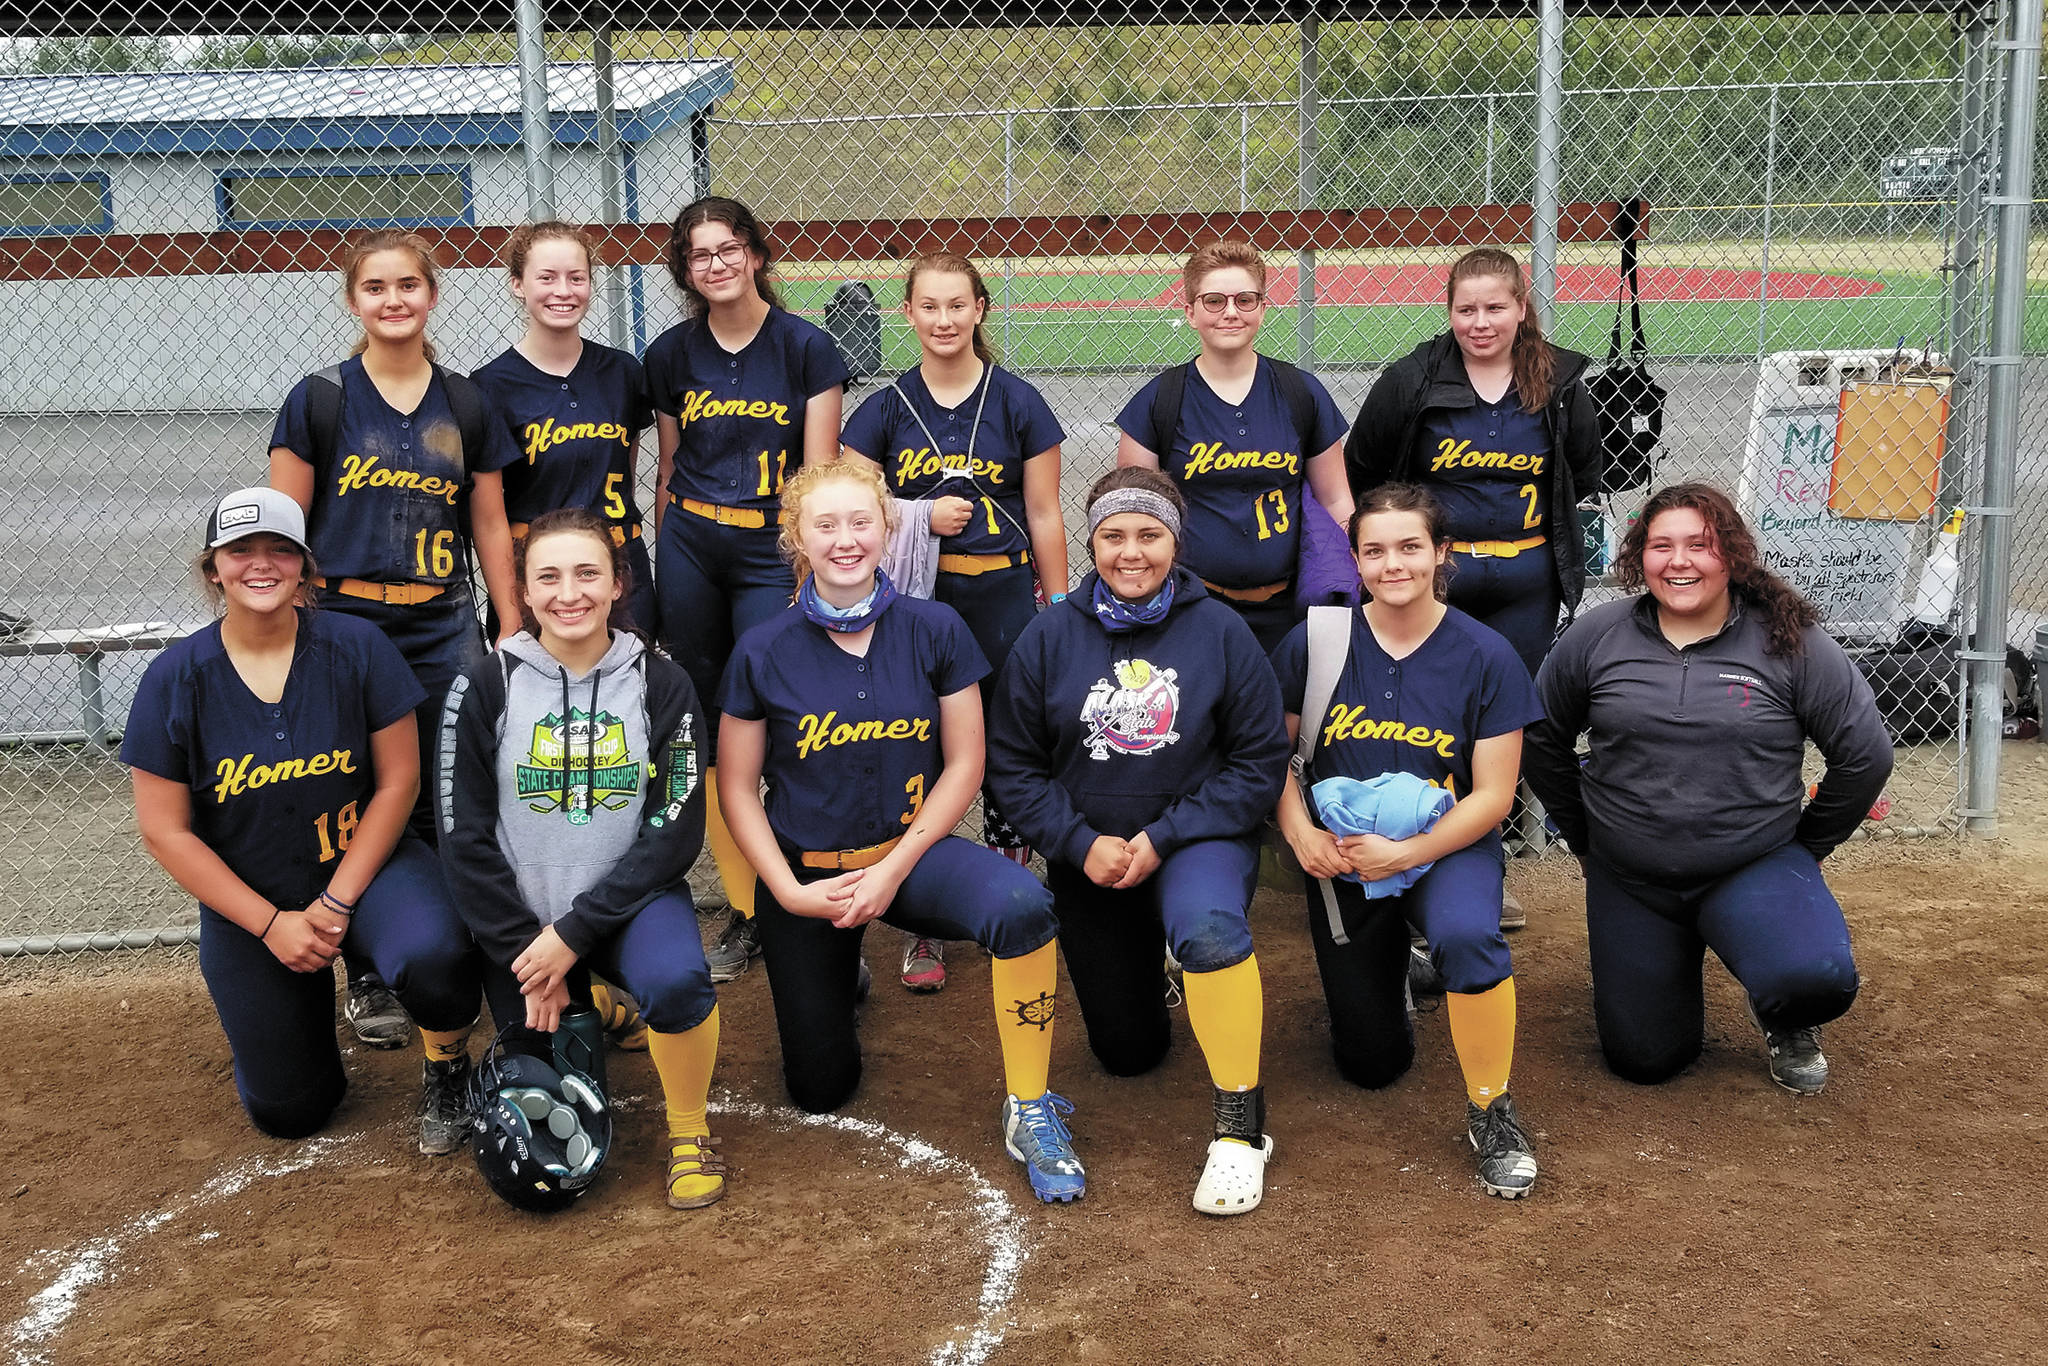 Youth softball program ends season, continues to develop